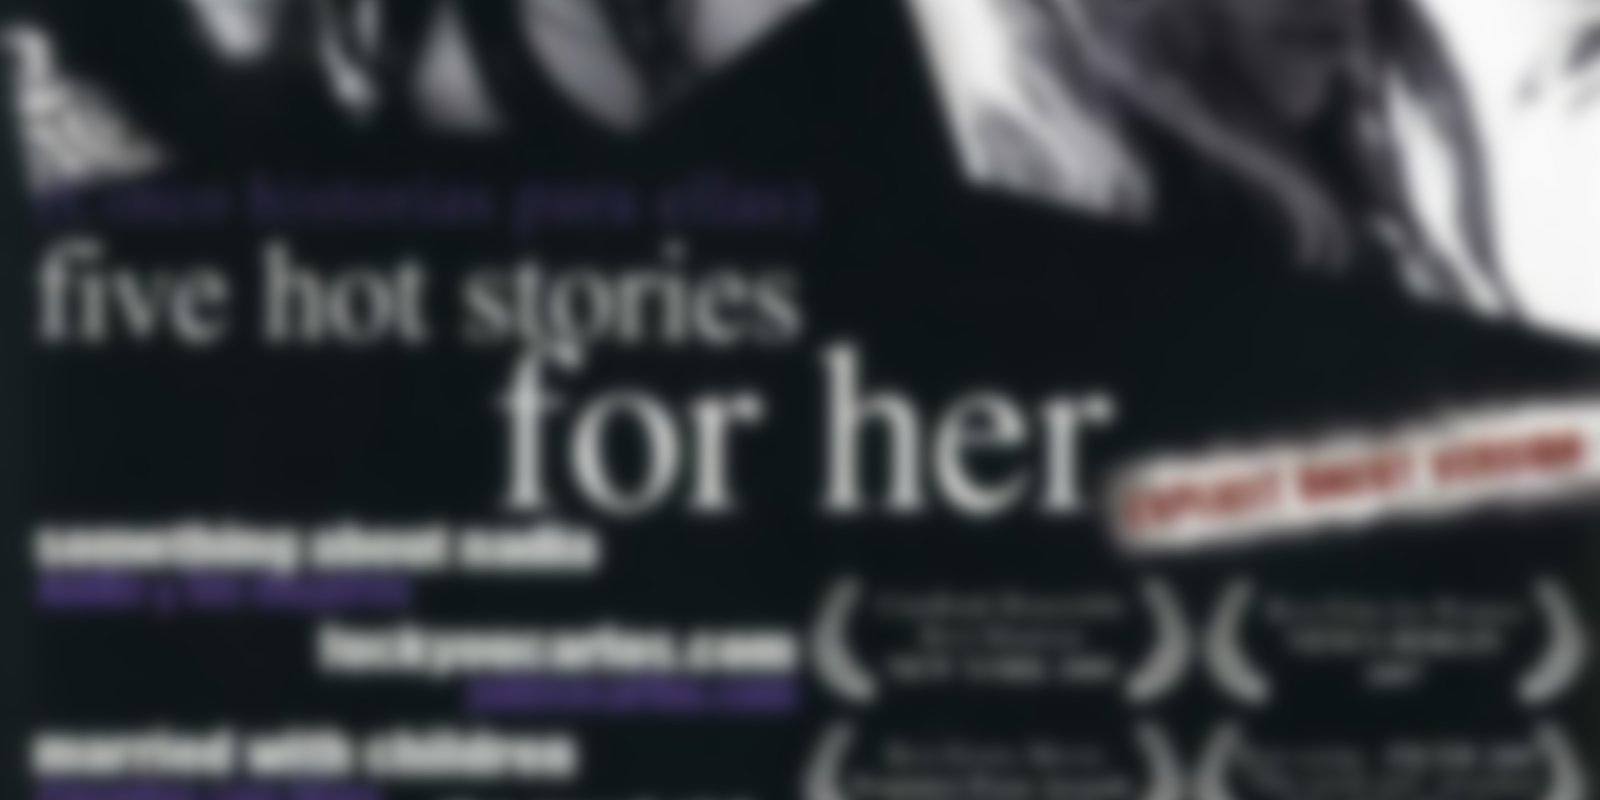 Five Hot Stories for Her